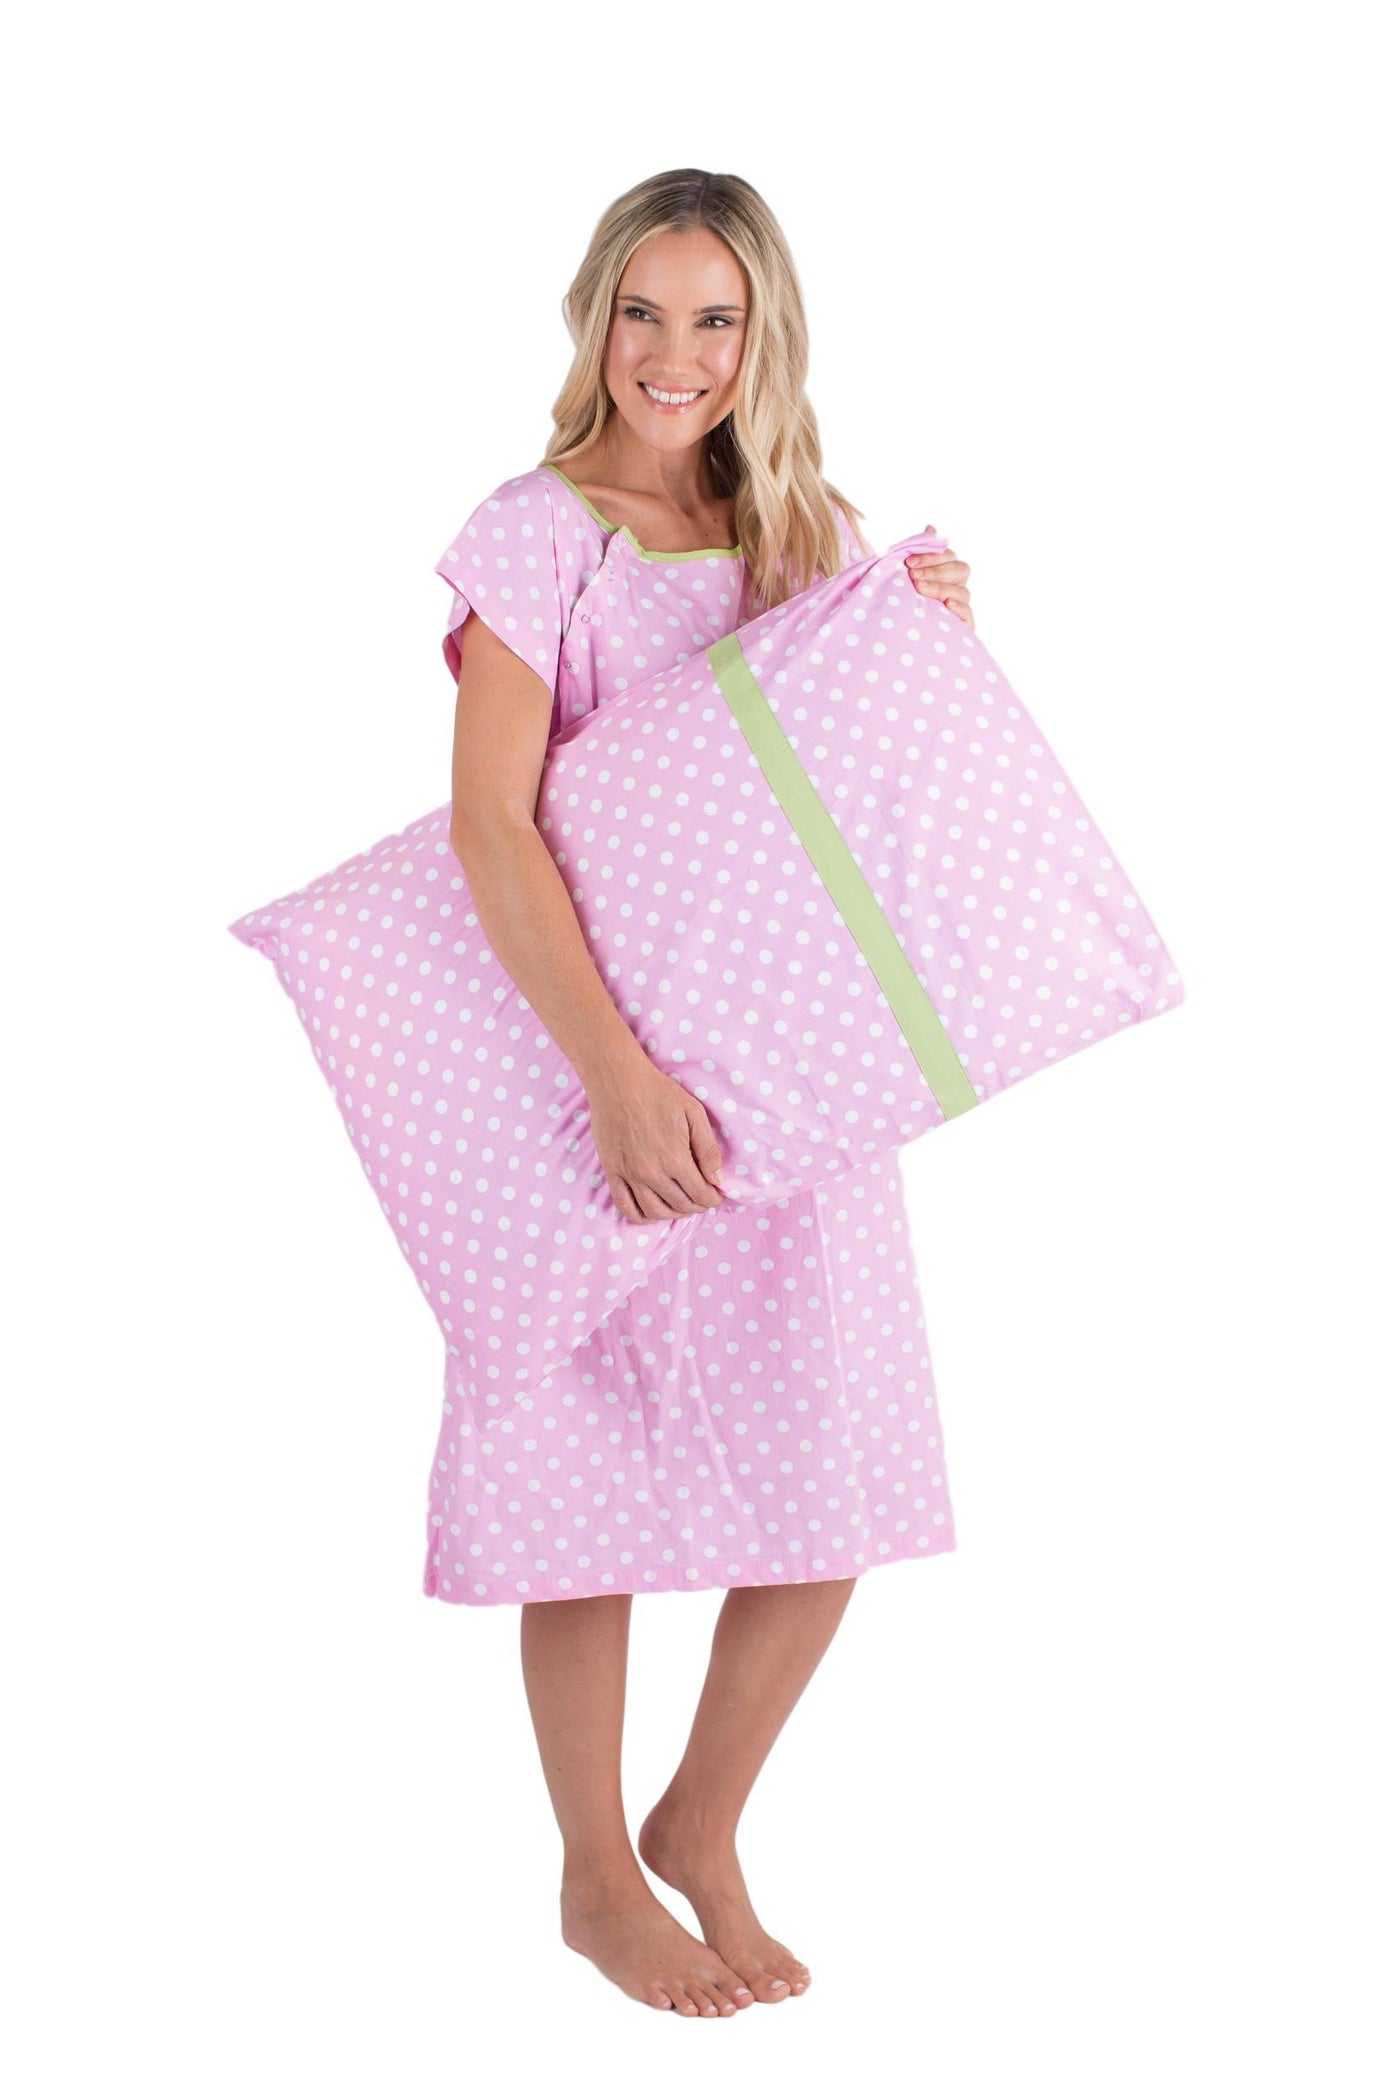 Molly Hospital Patient Gownie & Pillowcase Set